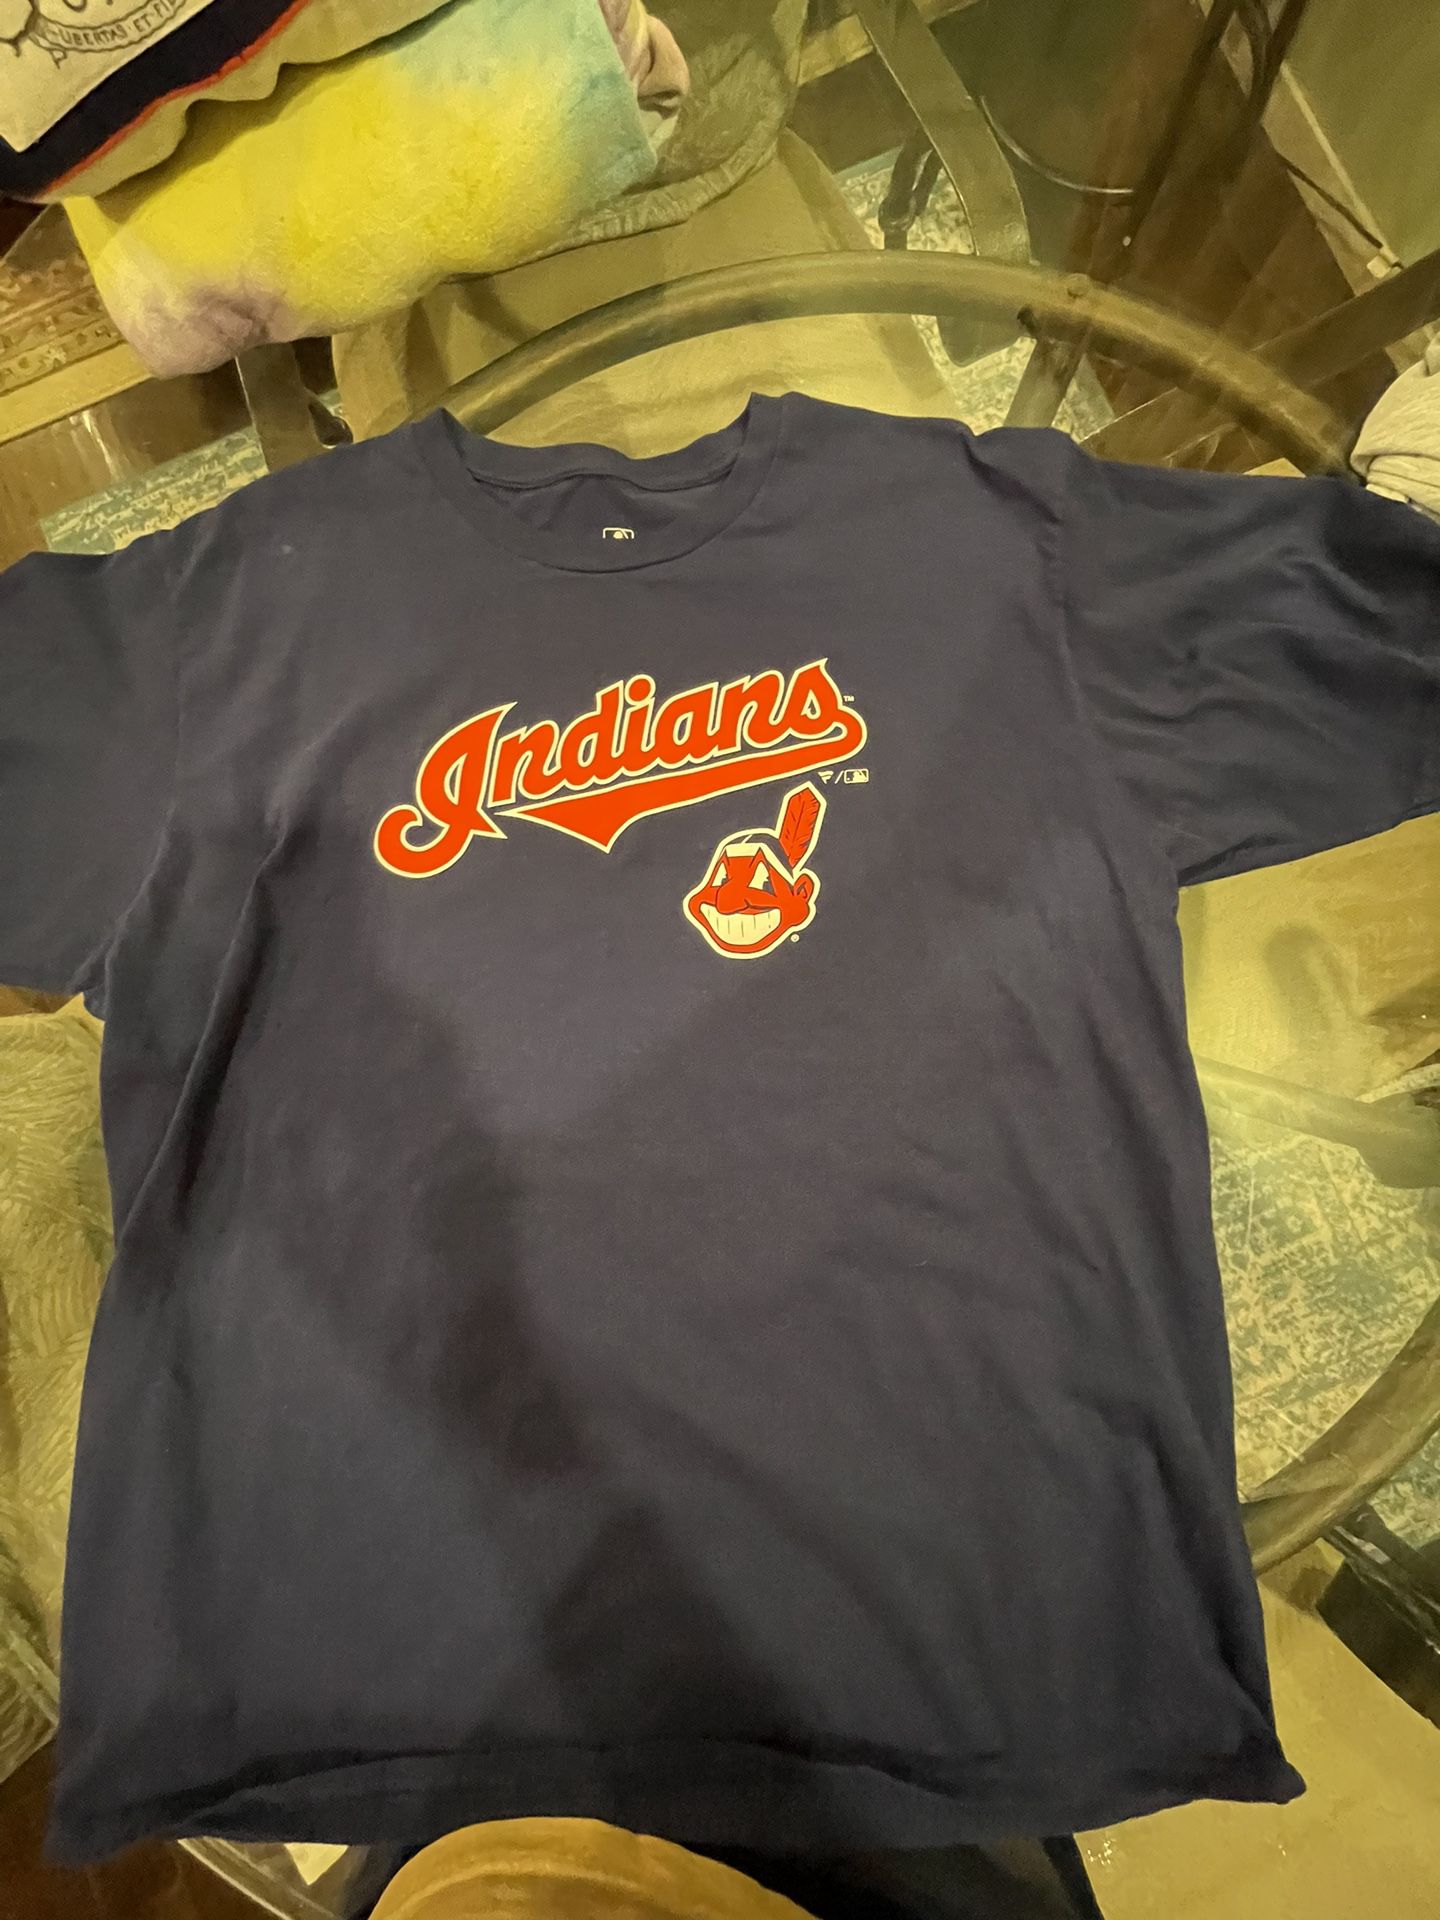 Cleveland Indians Chief Wahoo Shirt for Sale in Las Vegas, NV - OfferUp